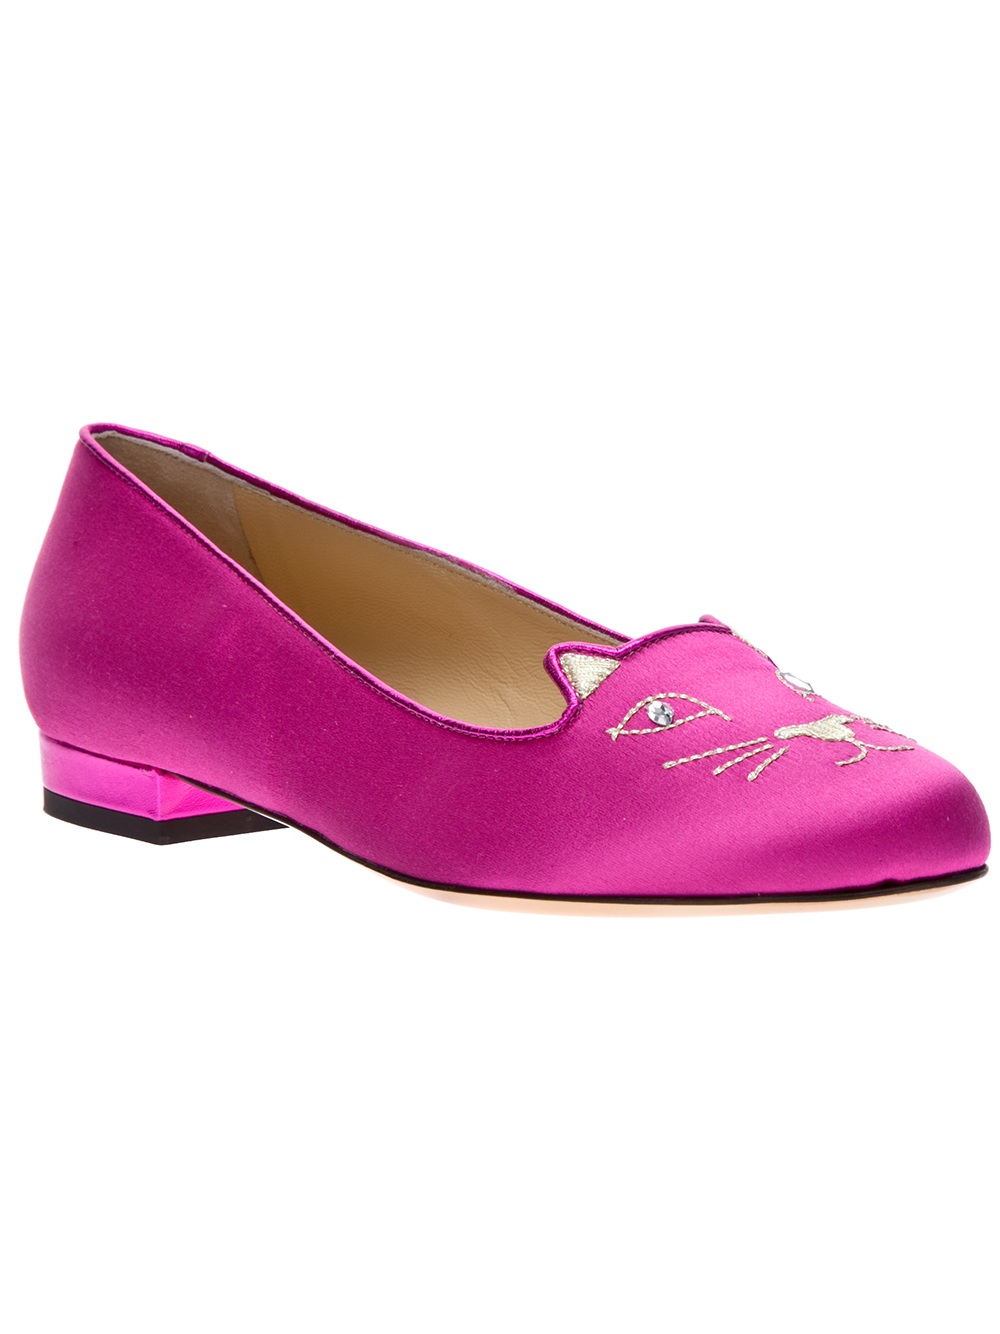 Charlotte olympia 'kitty' Slippers in Pink | Lyst